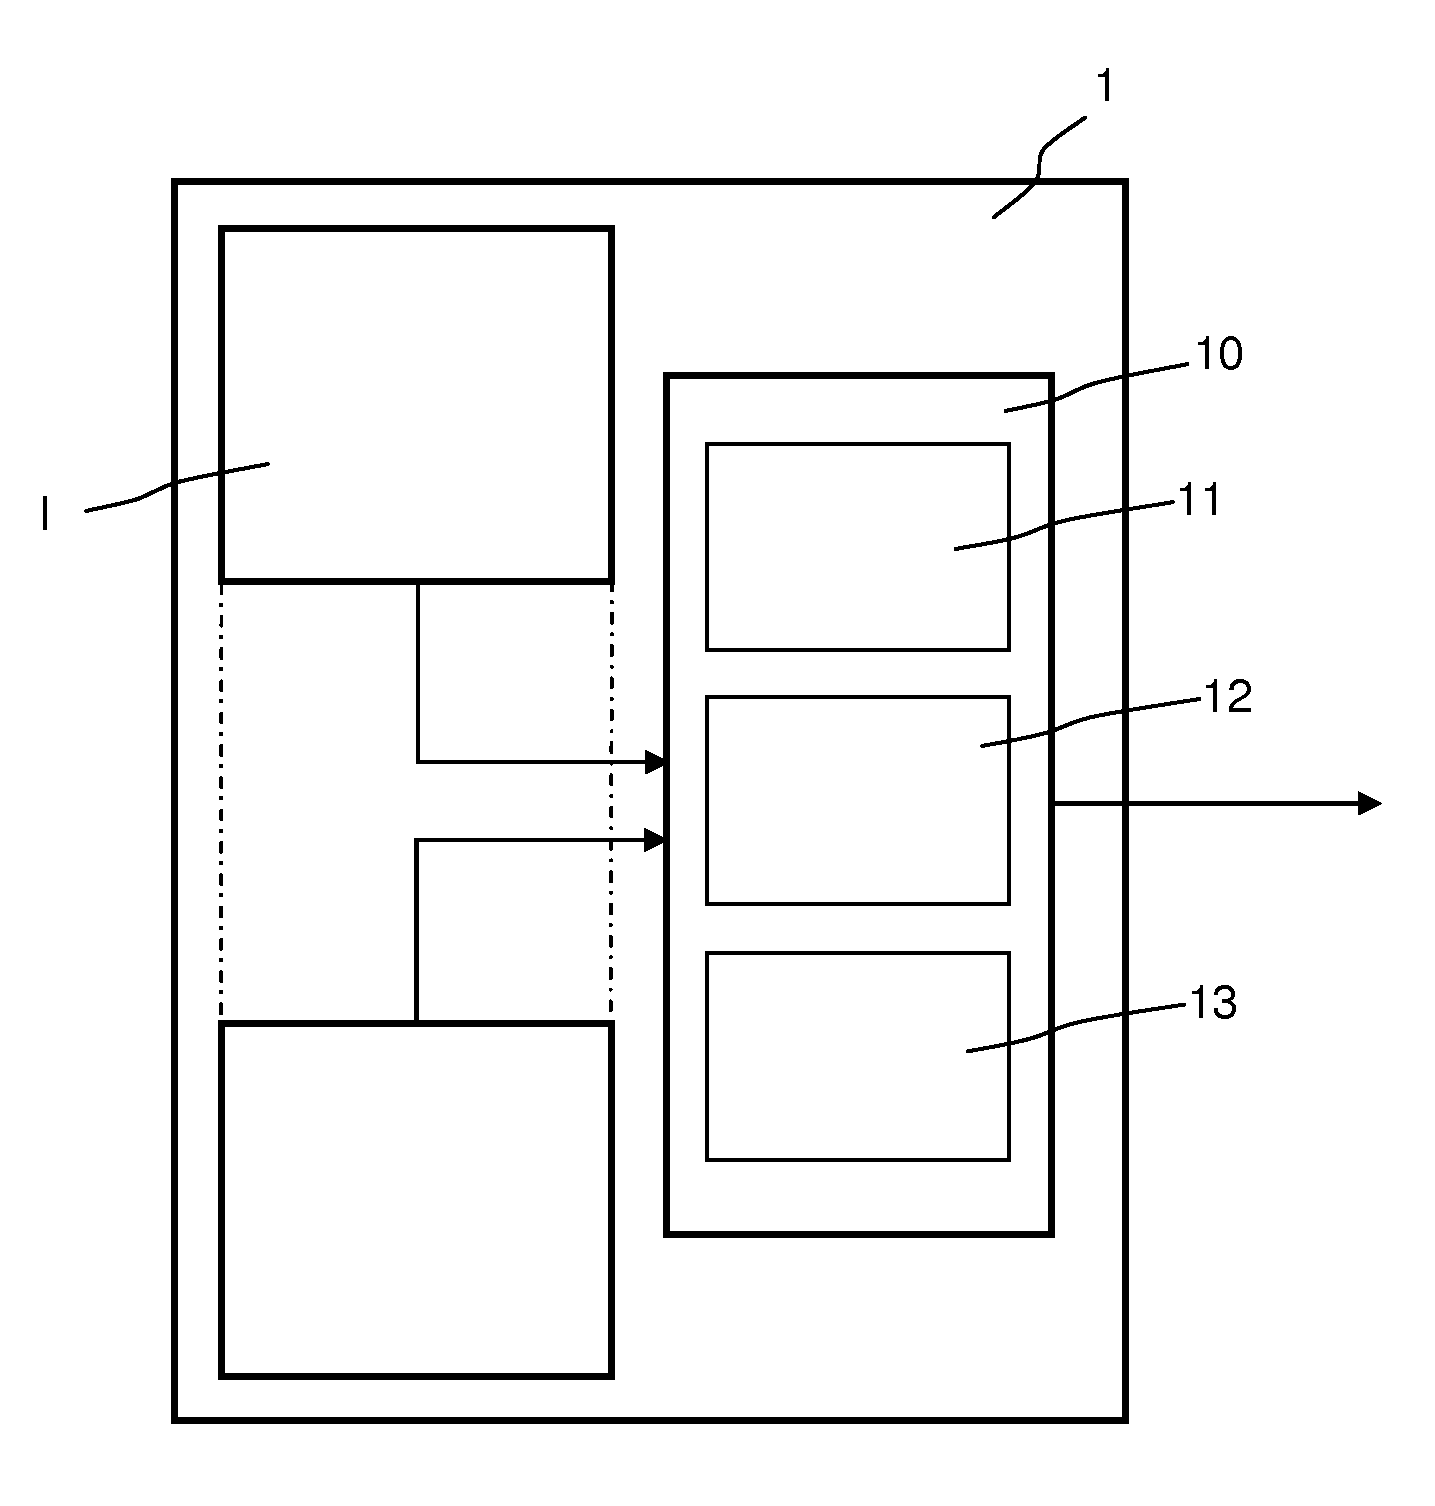 System for processing graphic objects including a secured graphic manager